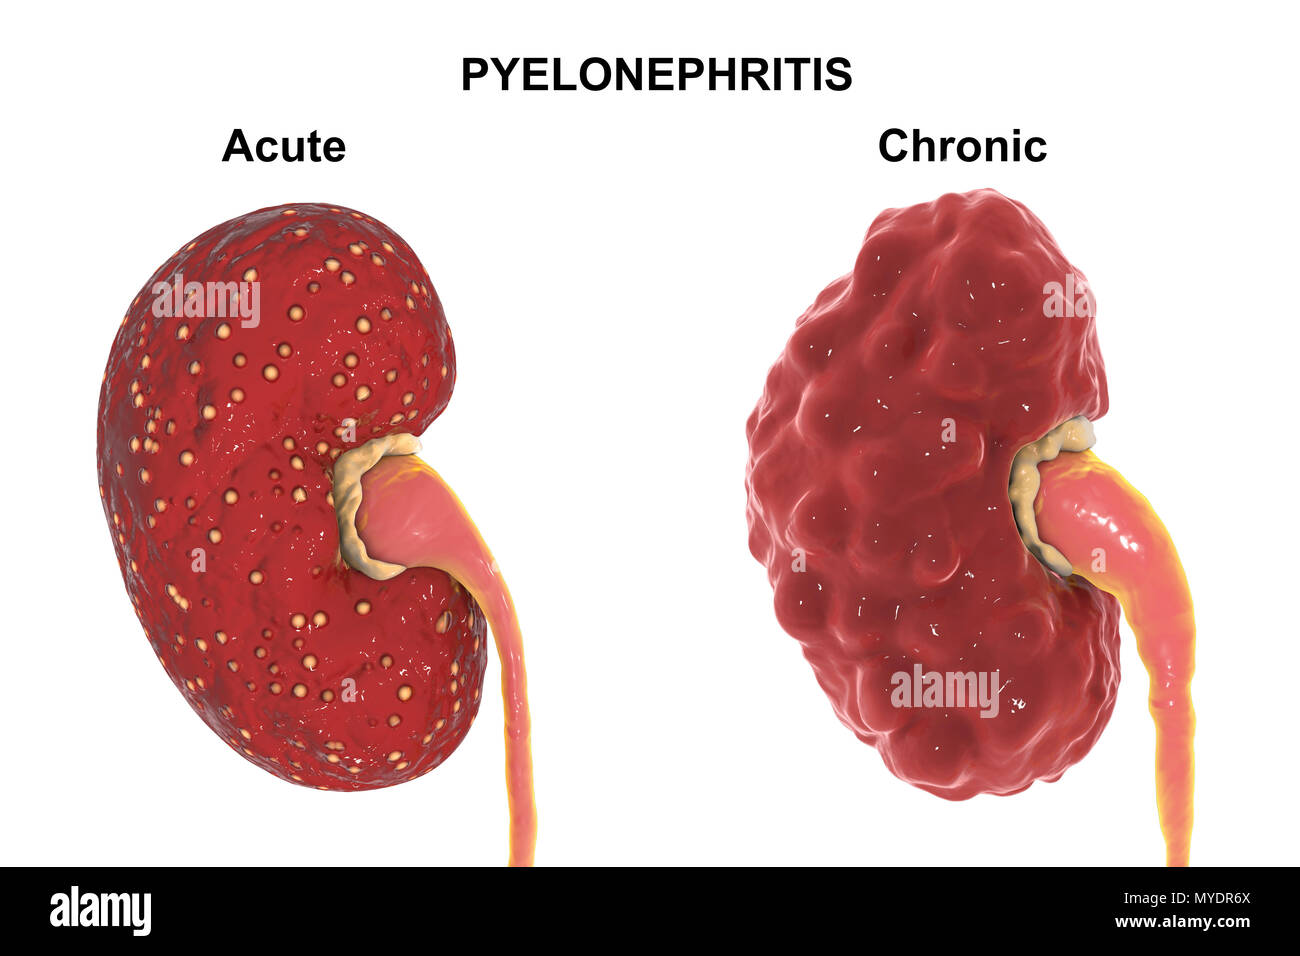 Comparison of gross anatomy of acute and chronic pyelonephritis, illustration. There are small abscesses (yellow) on the surface of the kidney with acute pyelonephritis (left). The kidney with chronic pyelonephritis (right) has an irregular scarred cortical surface, dilated and blunted calyces (yellow), and a dilated ureter. Stock Photo